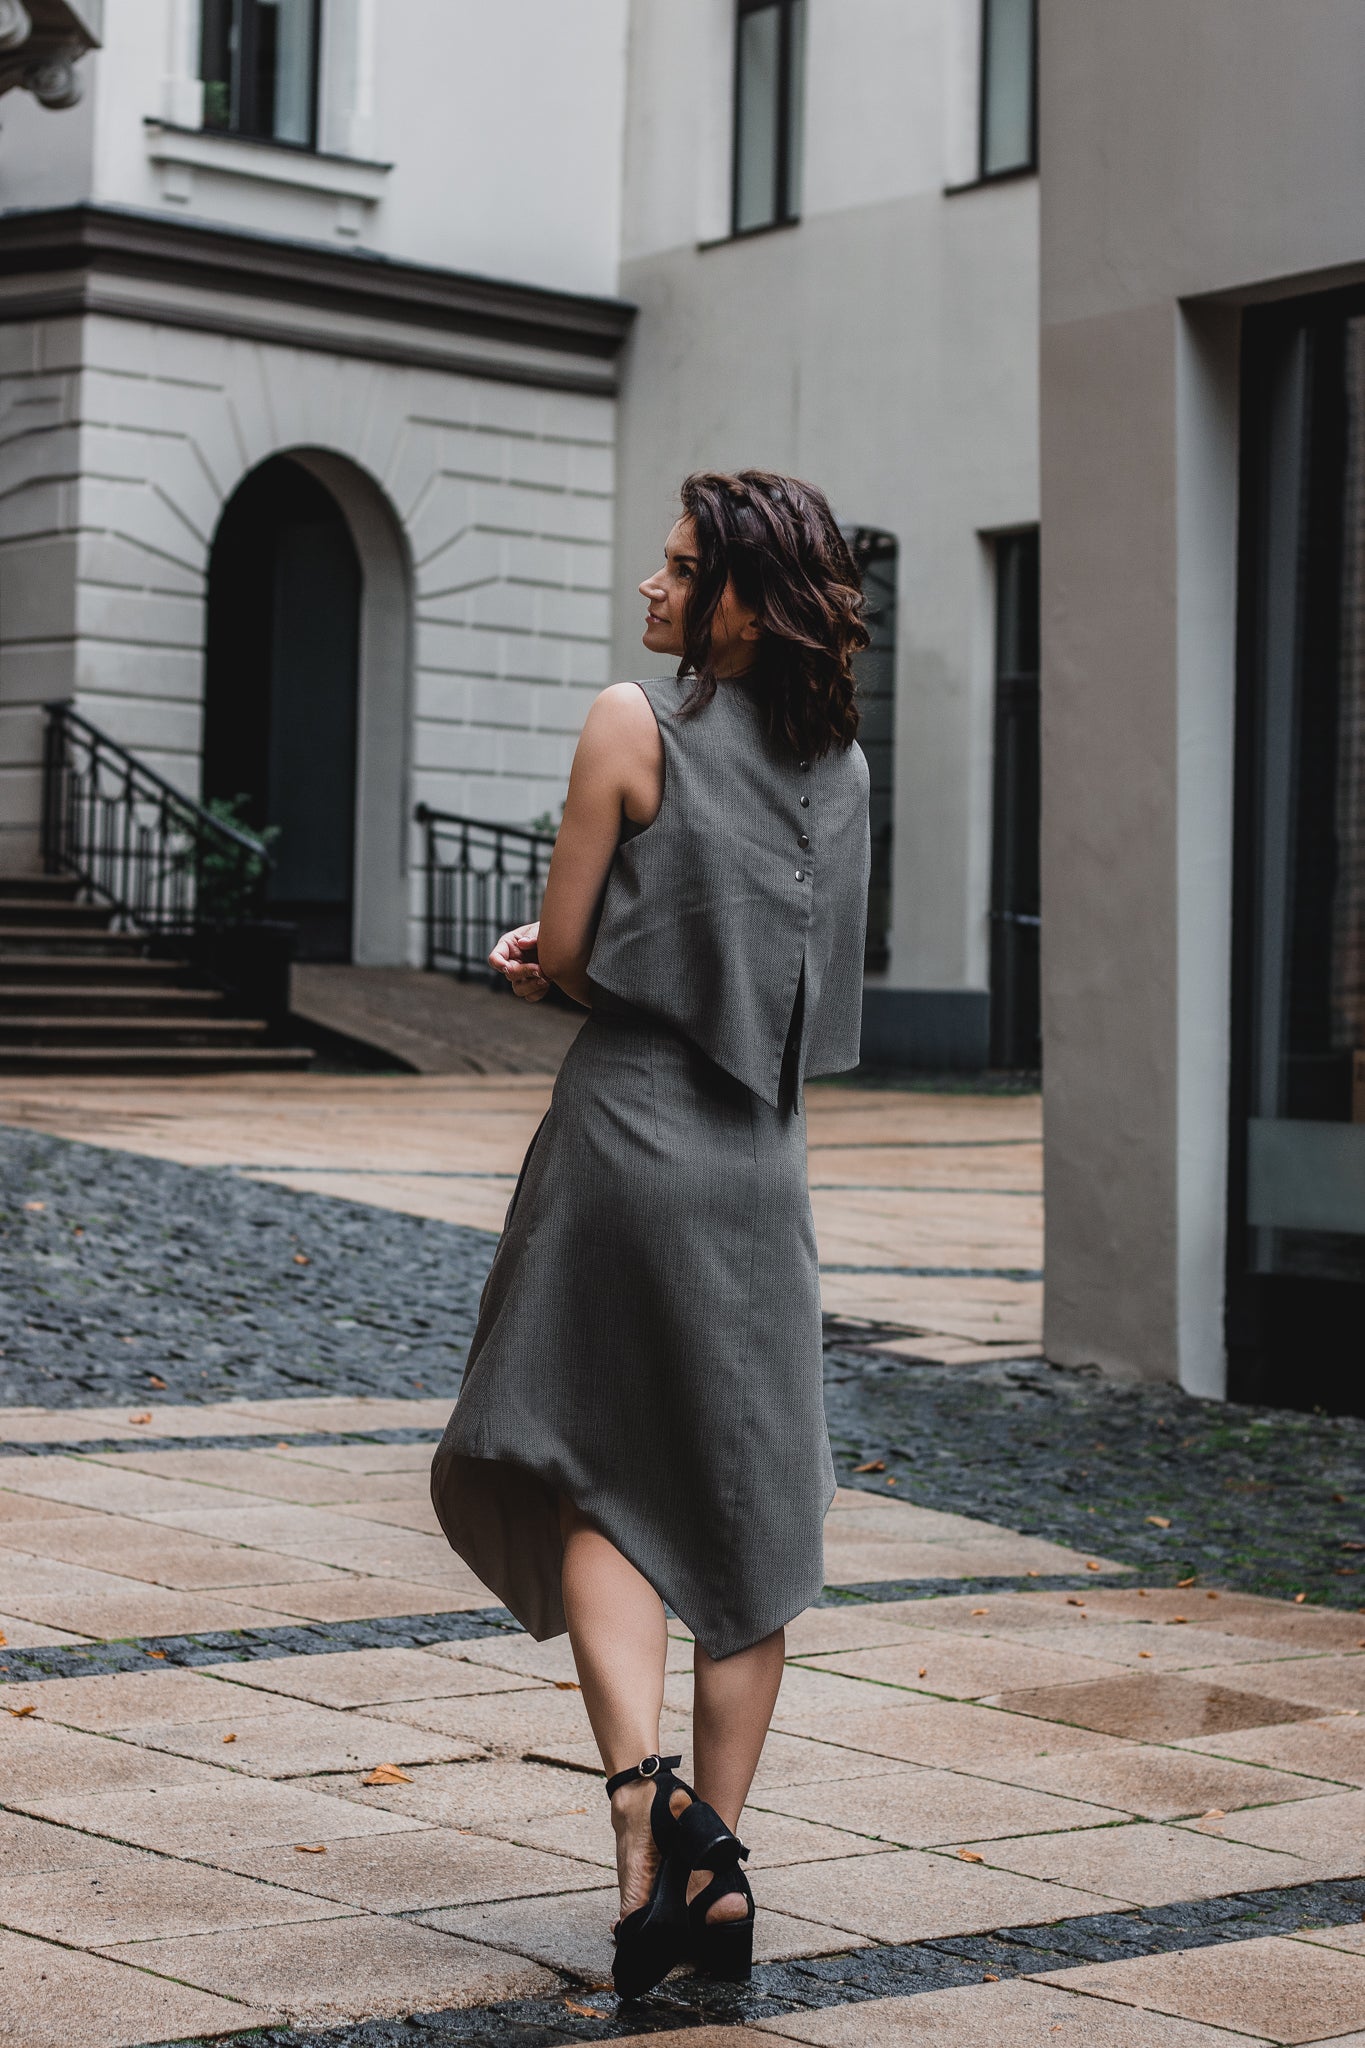 beautiful woman on a sunny day, wearing three piece dress -  two tops and gray brown triangle skirt together with black heels